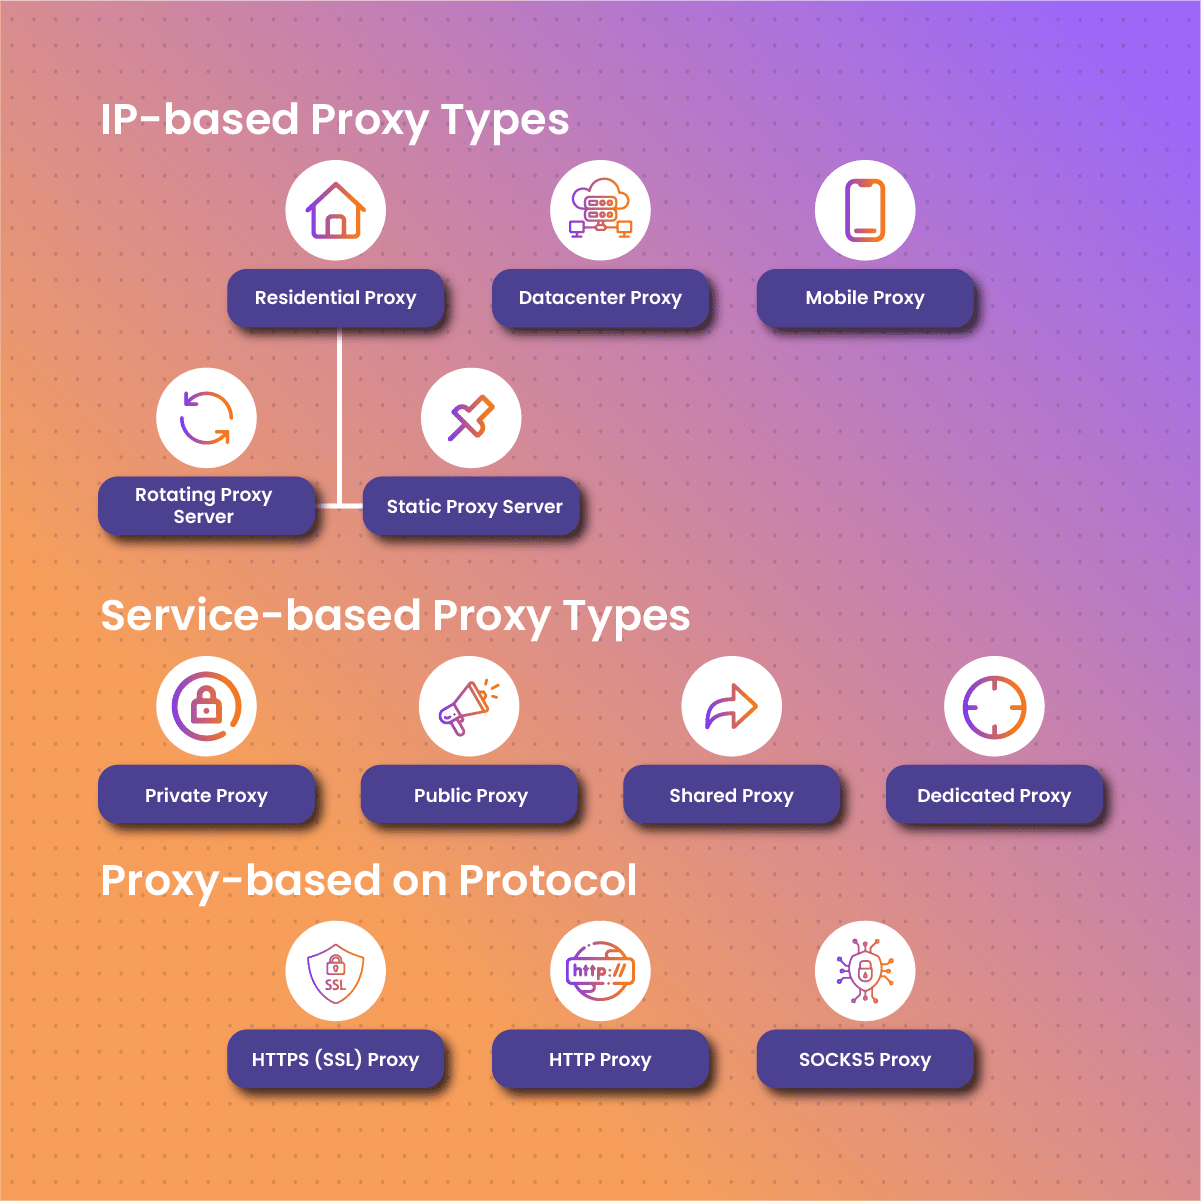 Types of Proxies